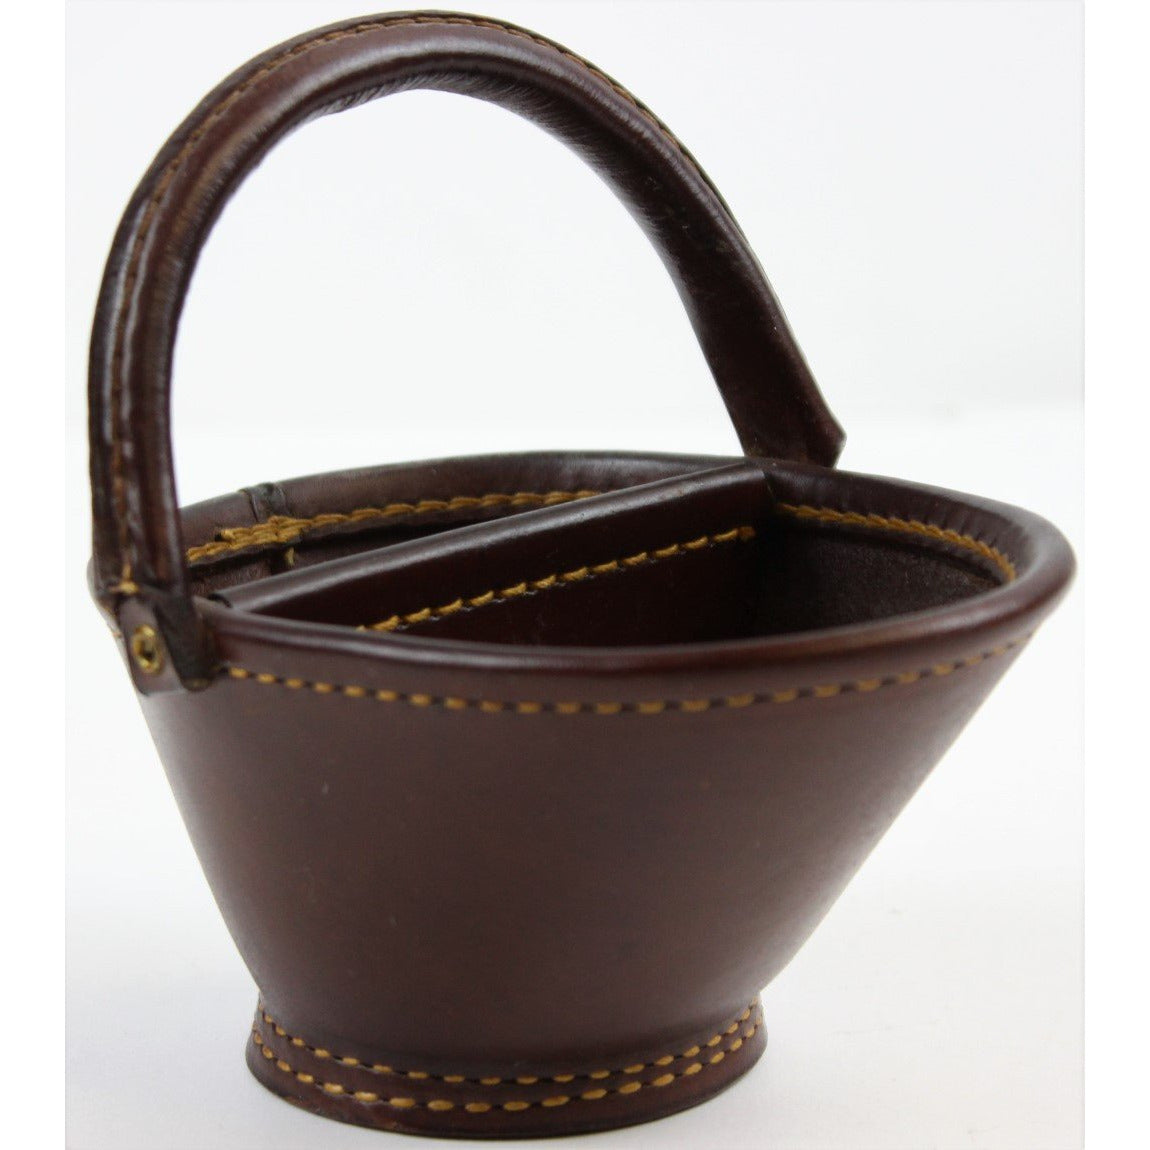 Leather Pipe Bucket